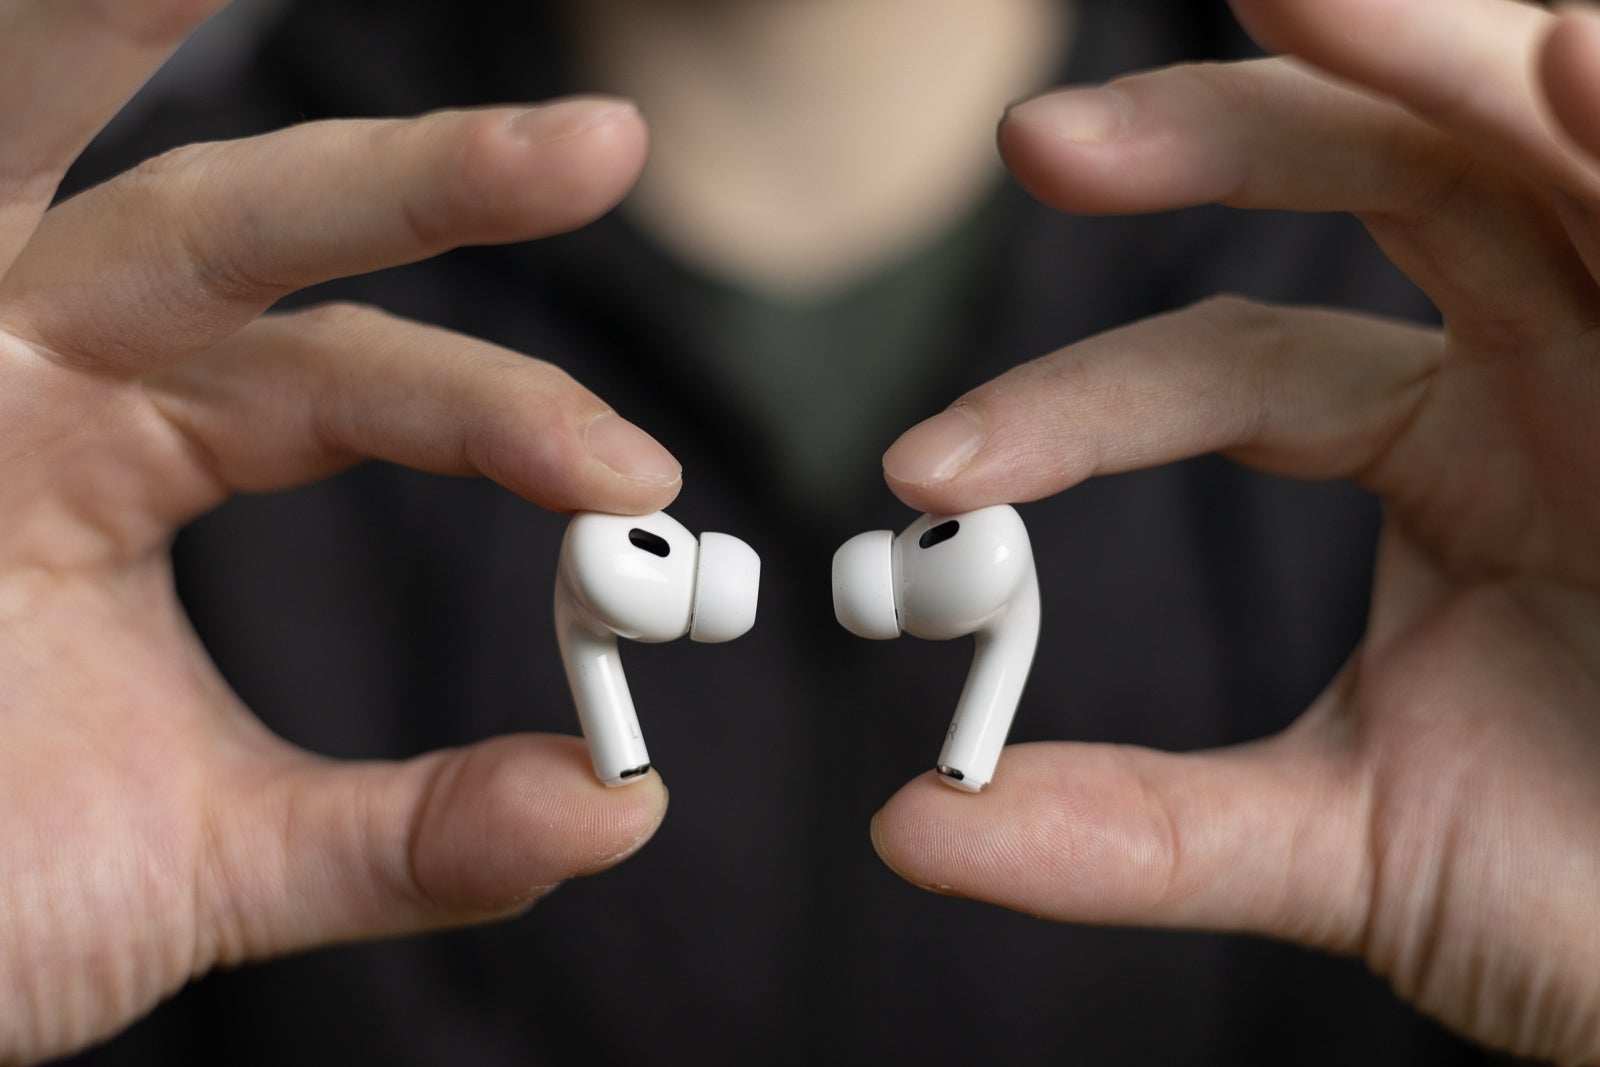 (Image Credit - PhoneArena) AirPods Pro 2 earbuds - AirPods Pro 2 review: Closer to perfection